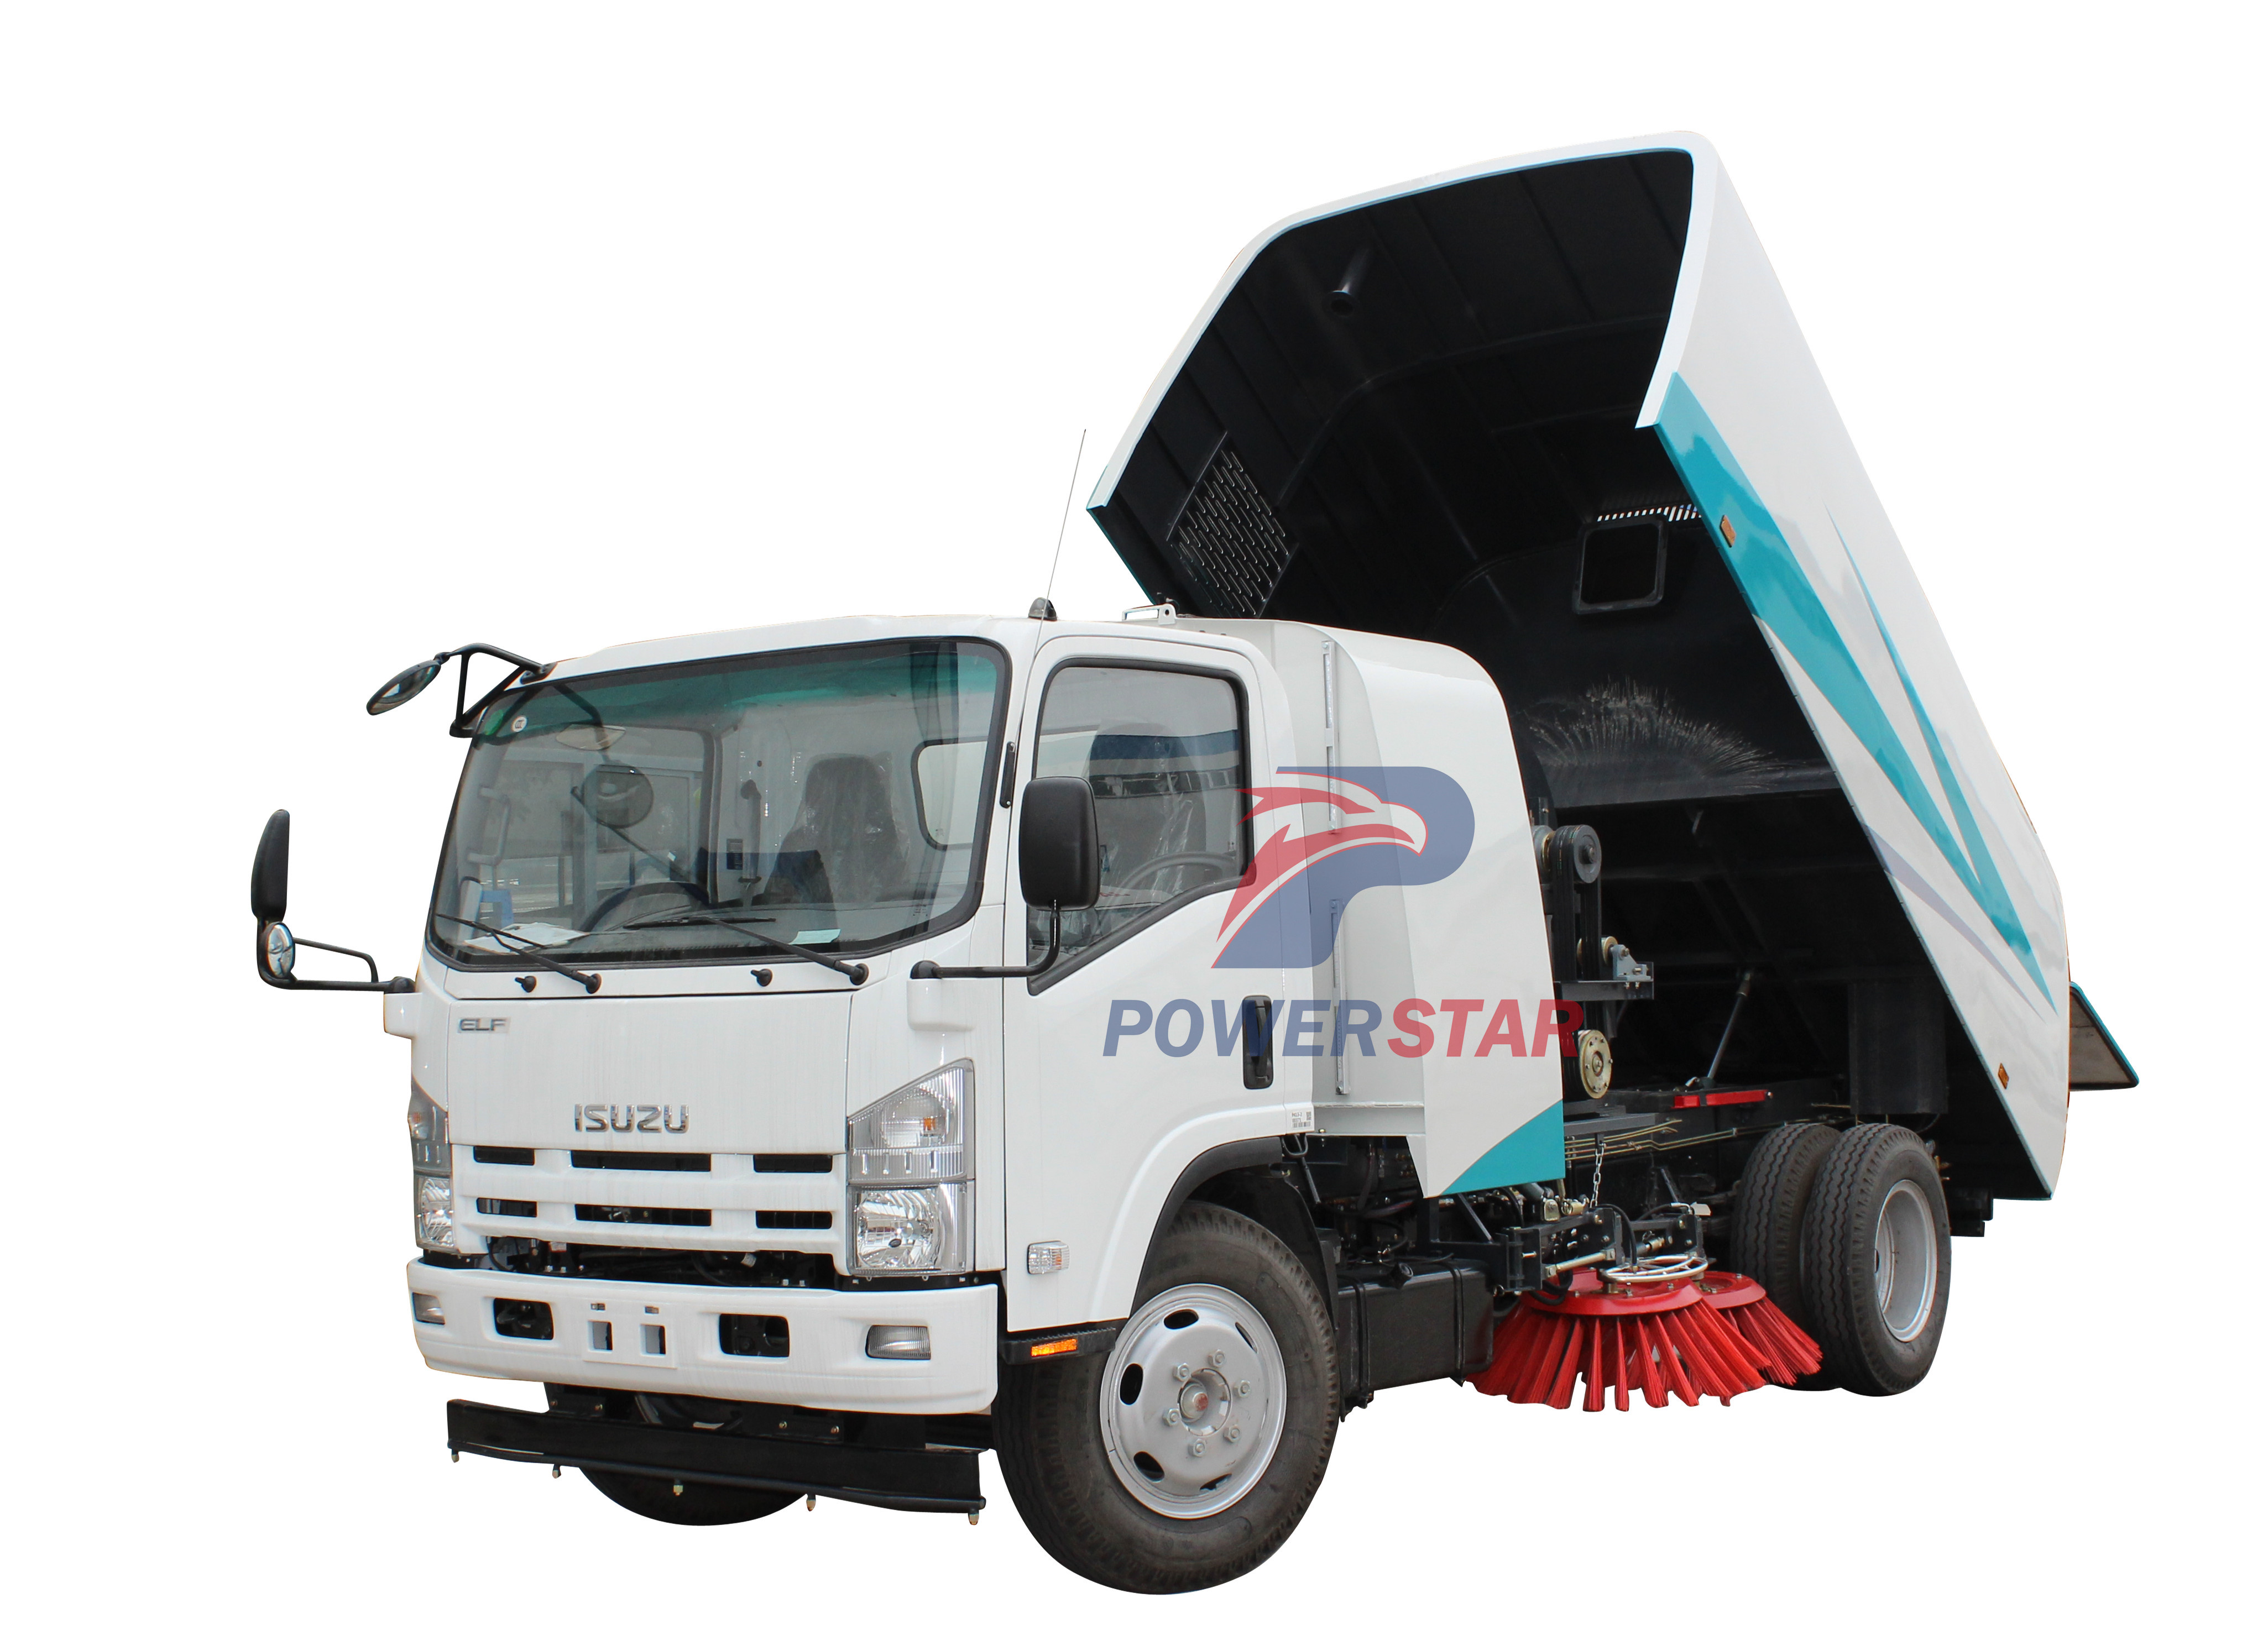 Hot Selling Road sweeper brushes In China - PowerStar Trucks